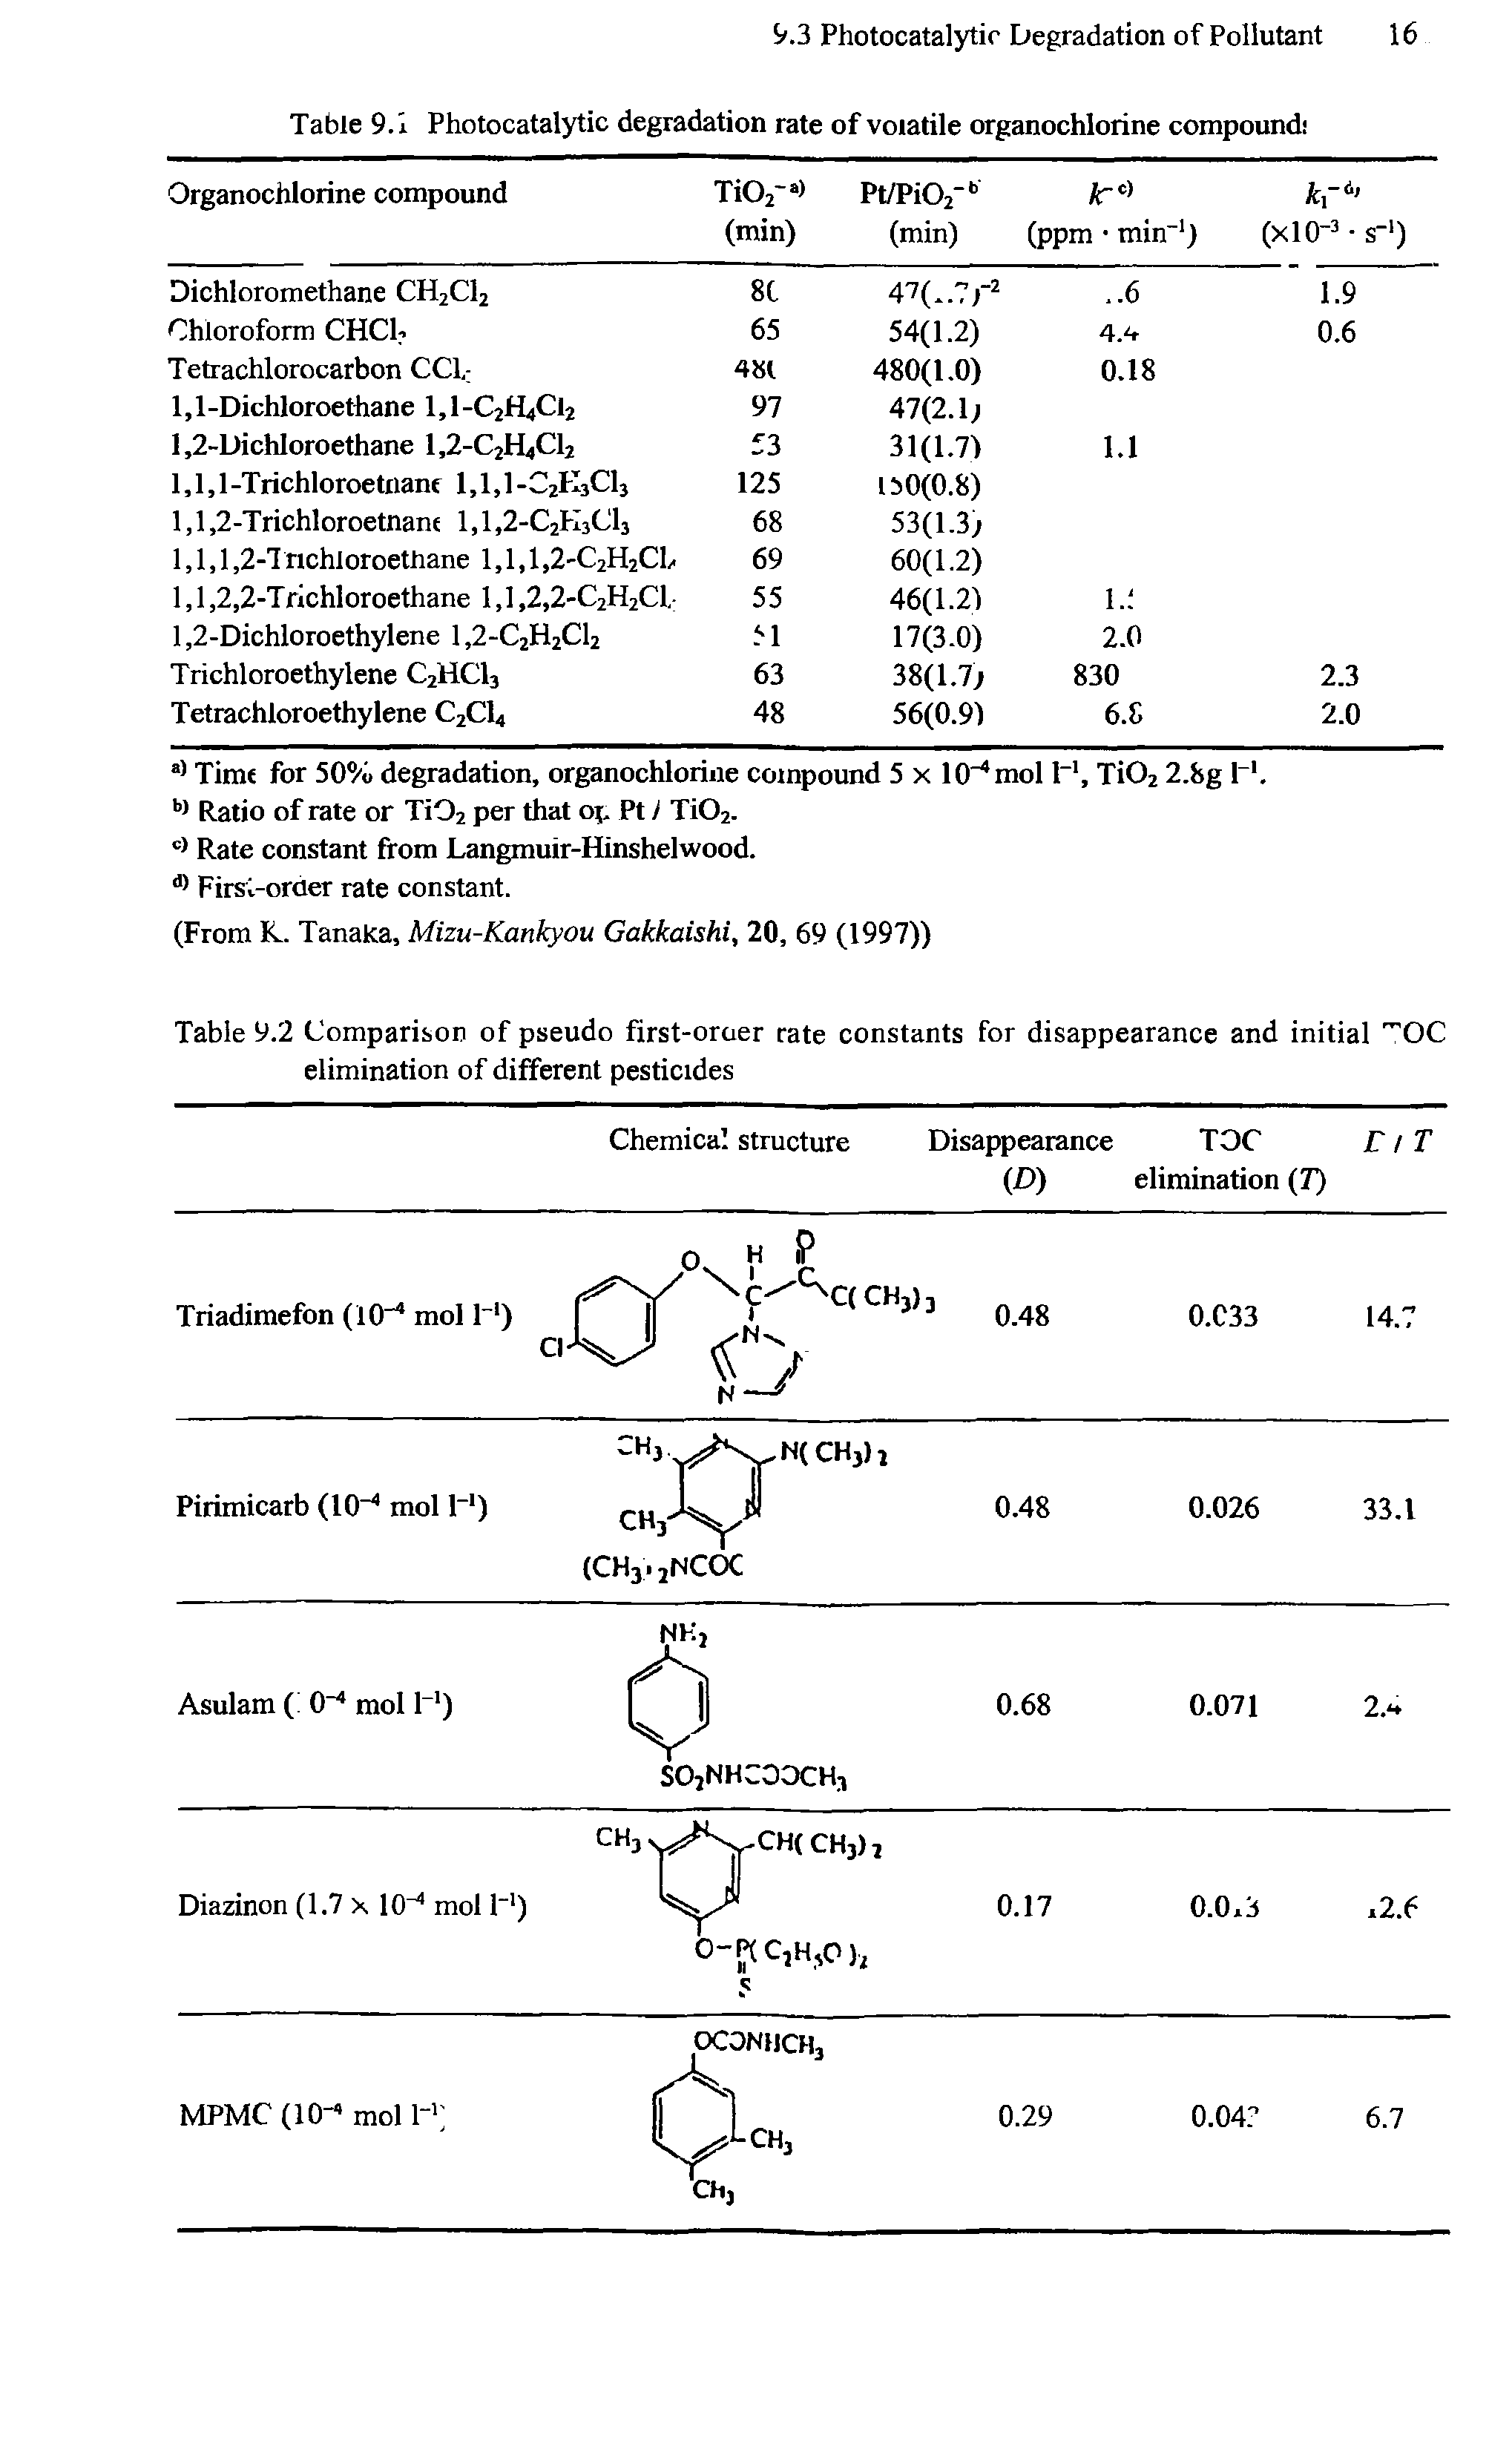 Table 9.2 Comparison of pseudo first-oraer rate constants for disappearance and initial rT OC elimination of different pesticides...